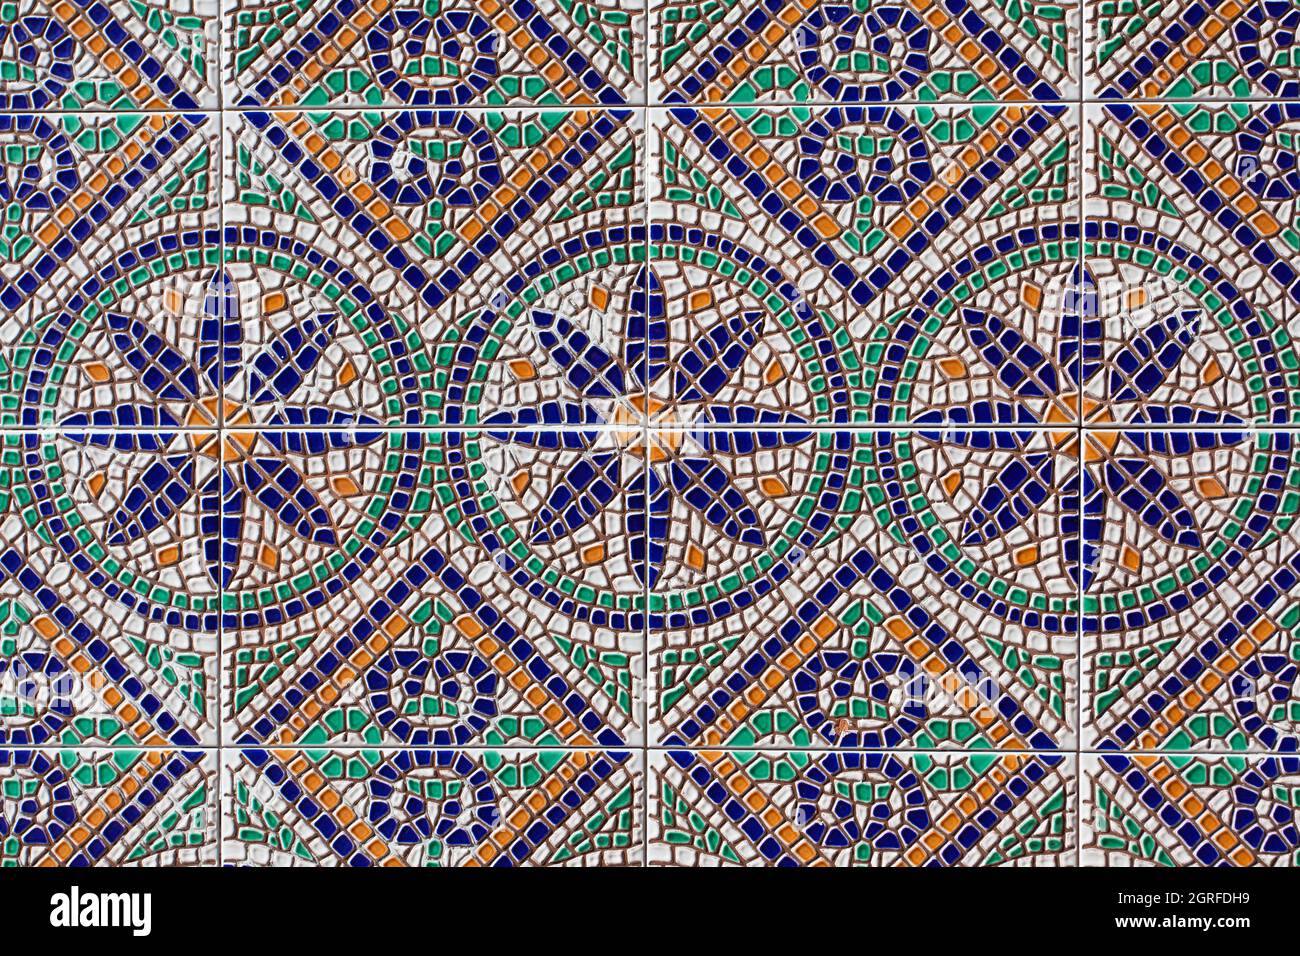 Ancient mosaic with colorful geometric and floral patterns closeup Stock Photo